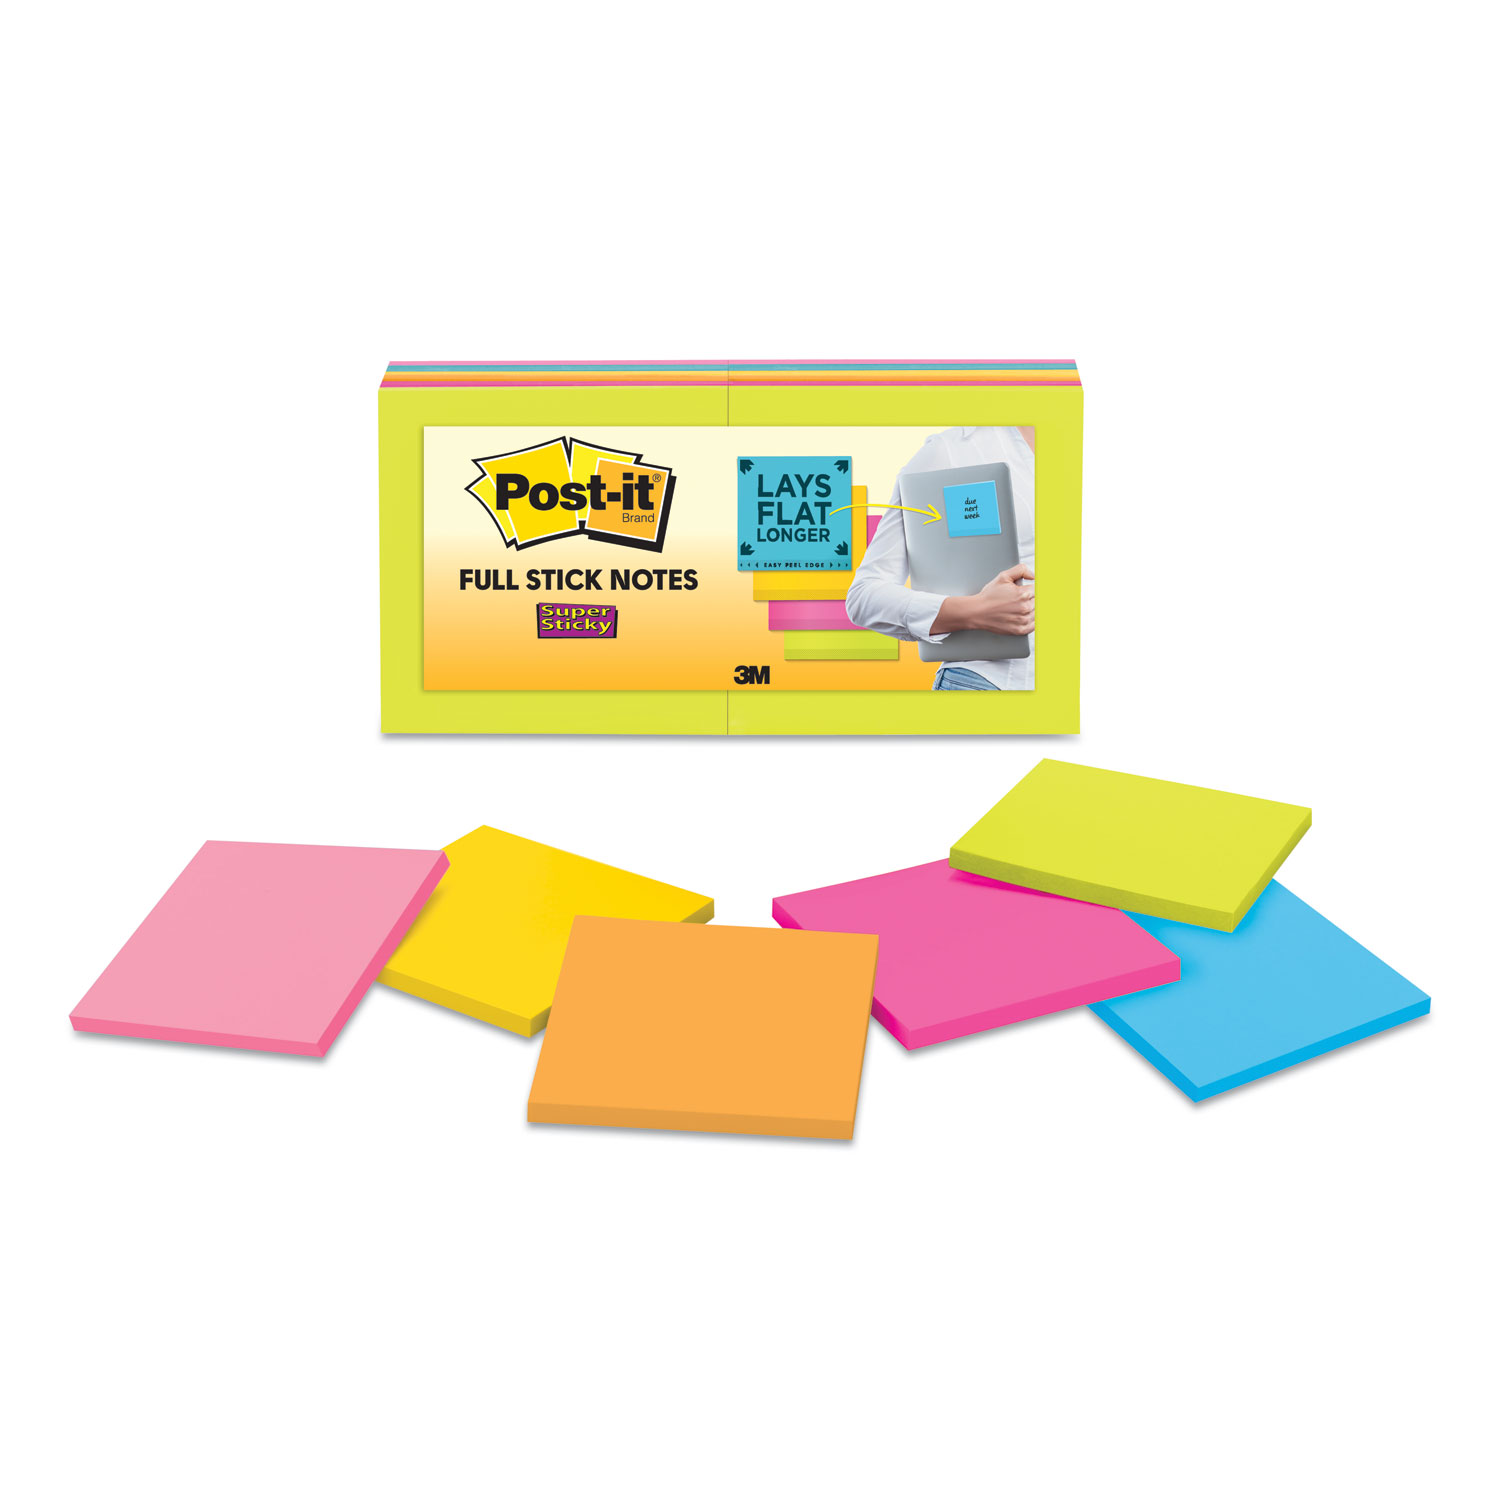  Post-it Notes Super Sticky F330-12SSAU Full Stick Notes, 3 x 3, Assorted Rio de Janeiro Colors, 25 Sheets/Pad, 12/Pack (MMMF33012SSAU) 